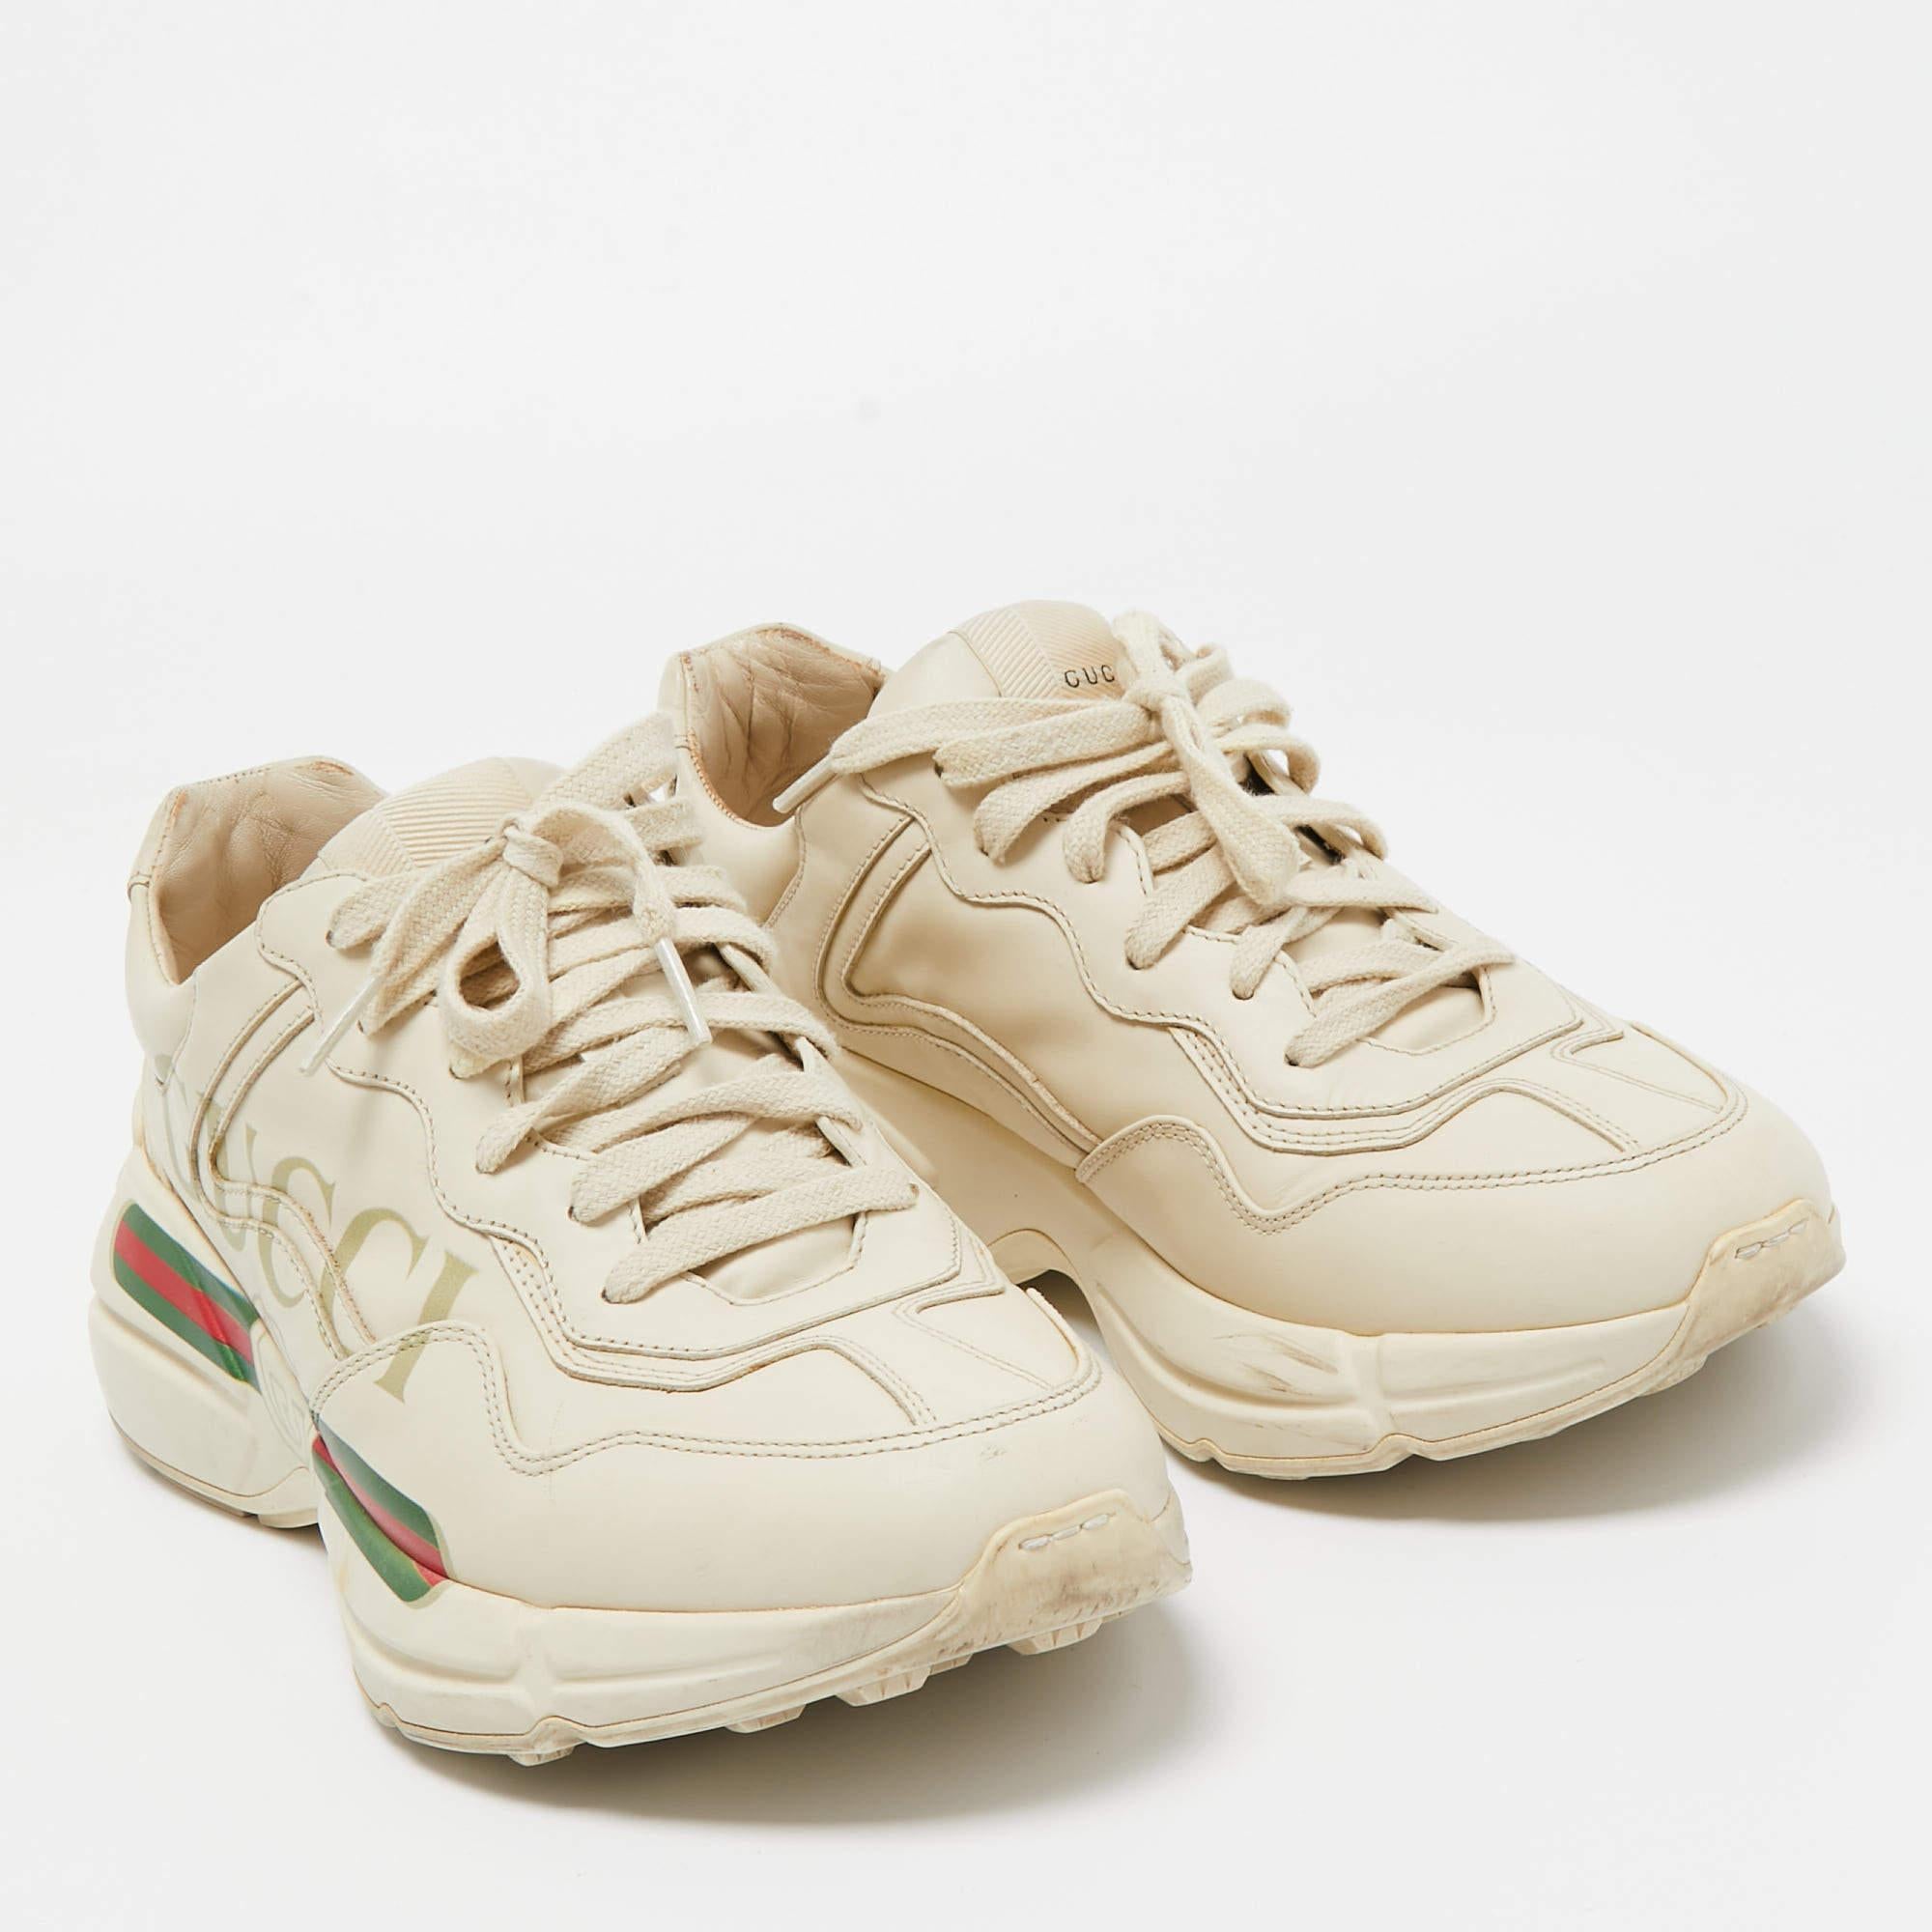 The time to feel trendy is now as Gucci brings you these superhit sneakers in cream. They are crafted from leather, detailed with lace-ups, and Web print on the sides and are set on highly comfortable soles. You are sure to receive nods of approval